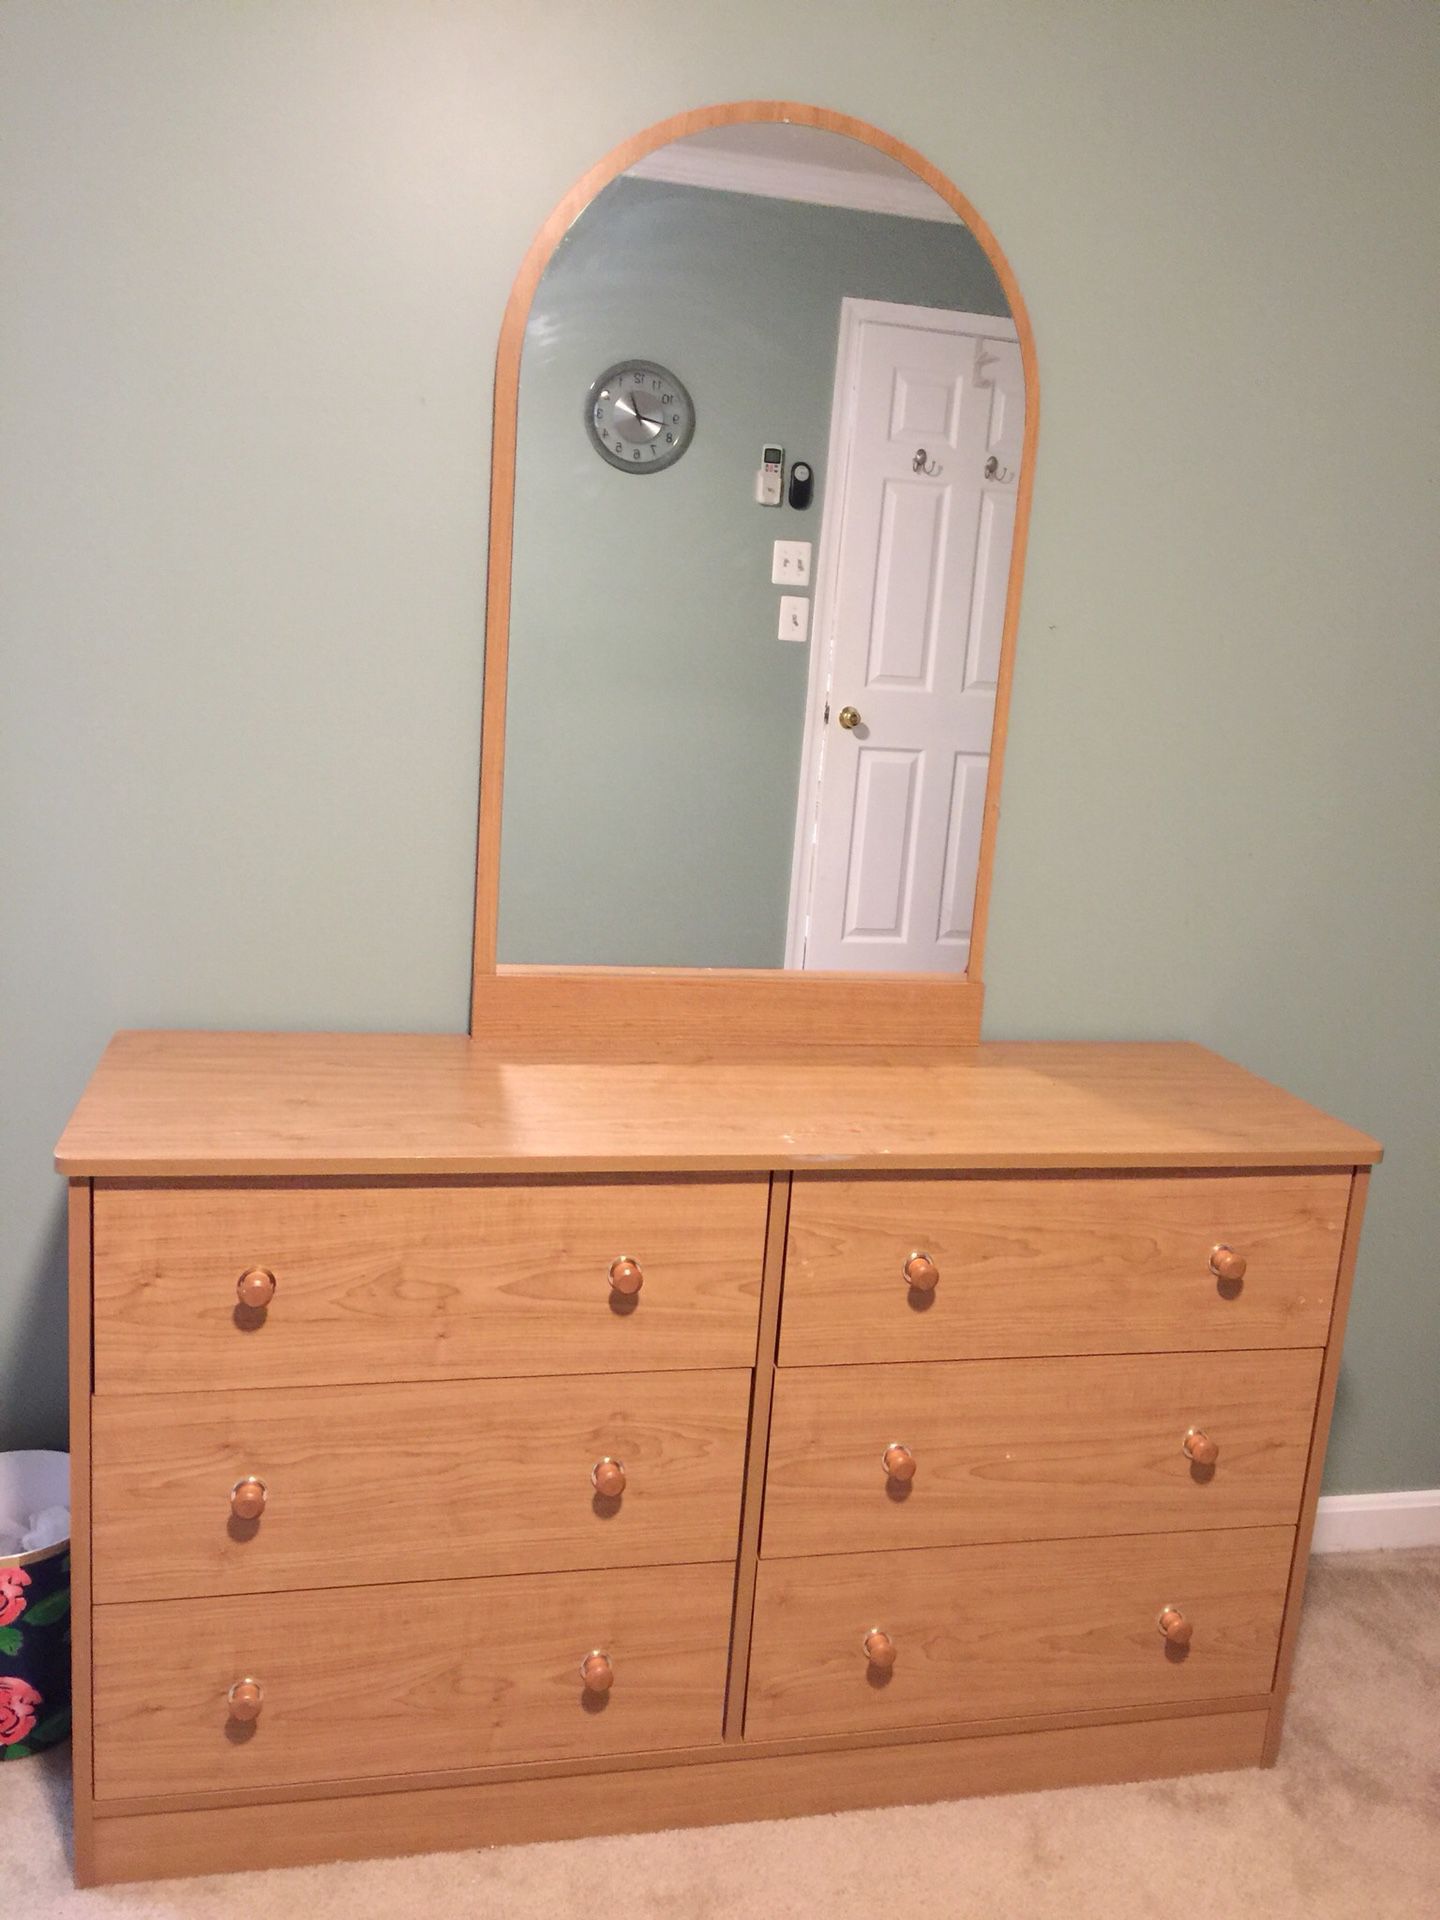 GOOD condition Twin bed with frame, dresser and mirror